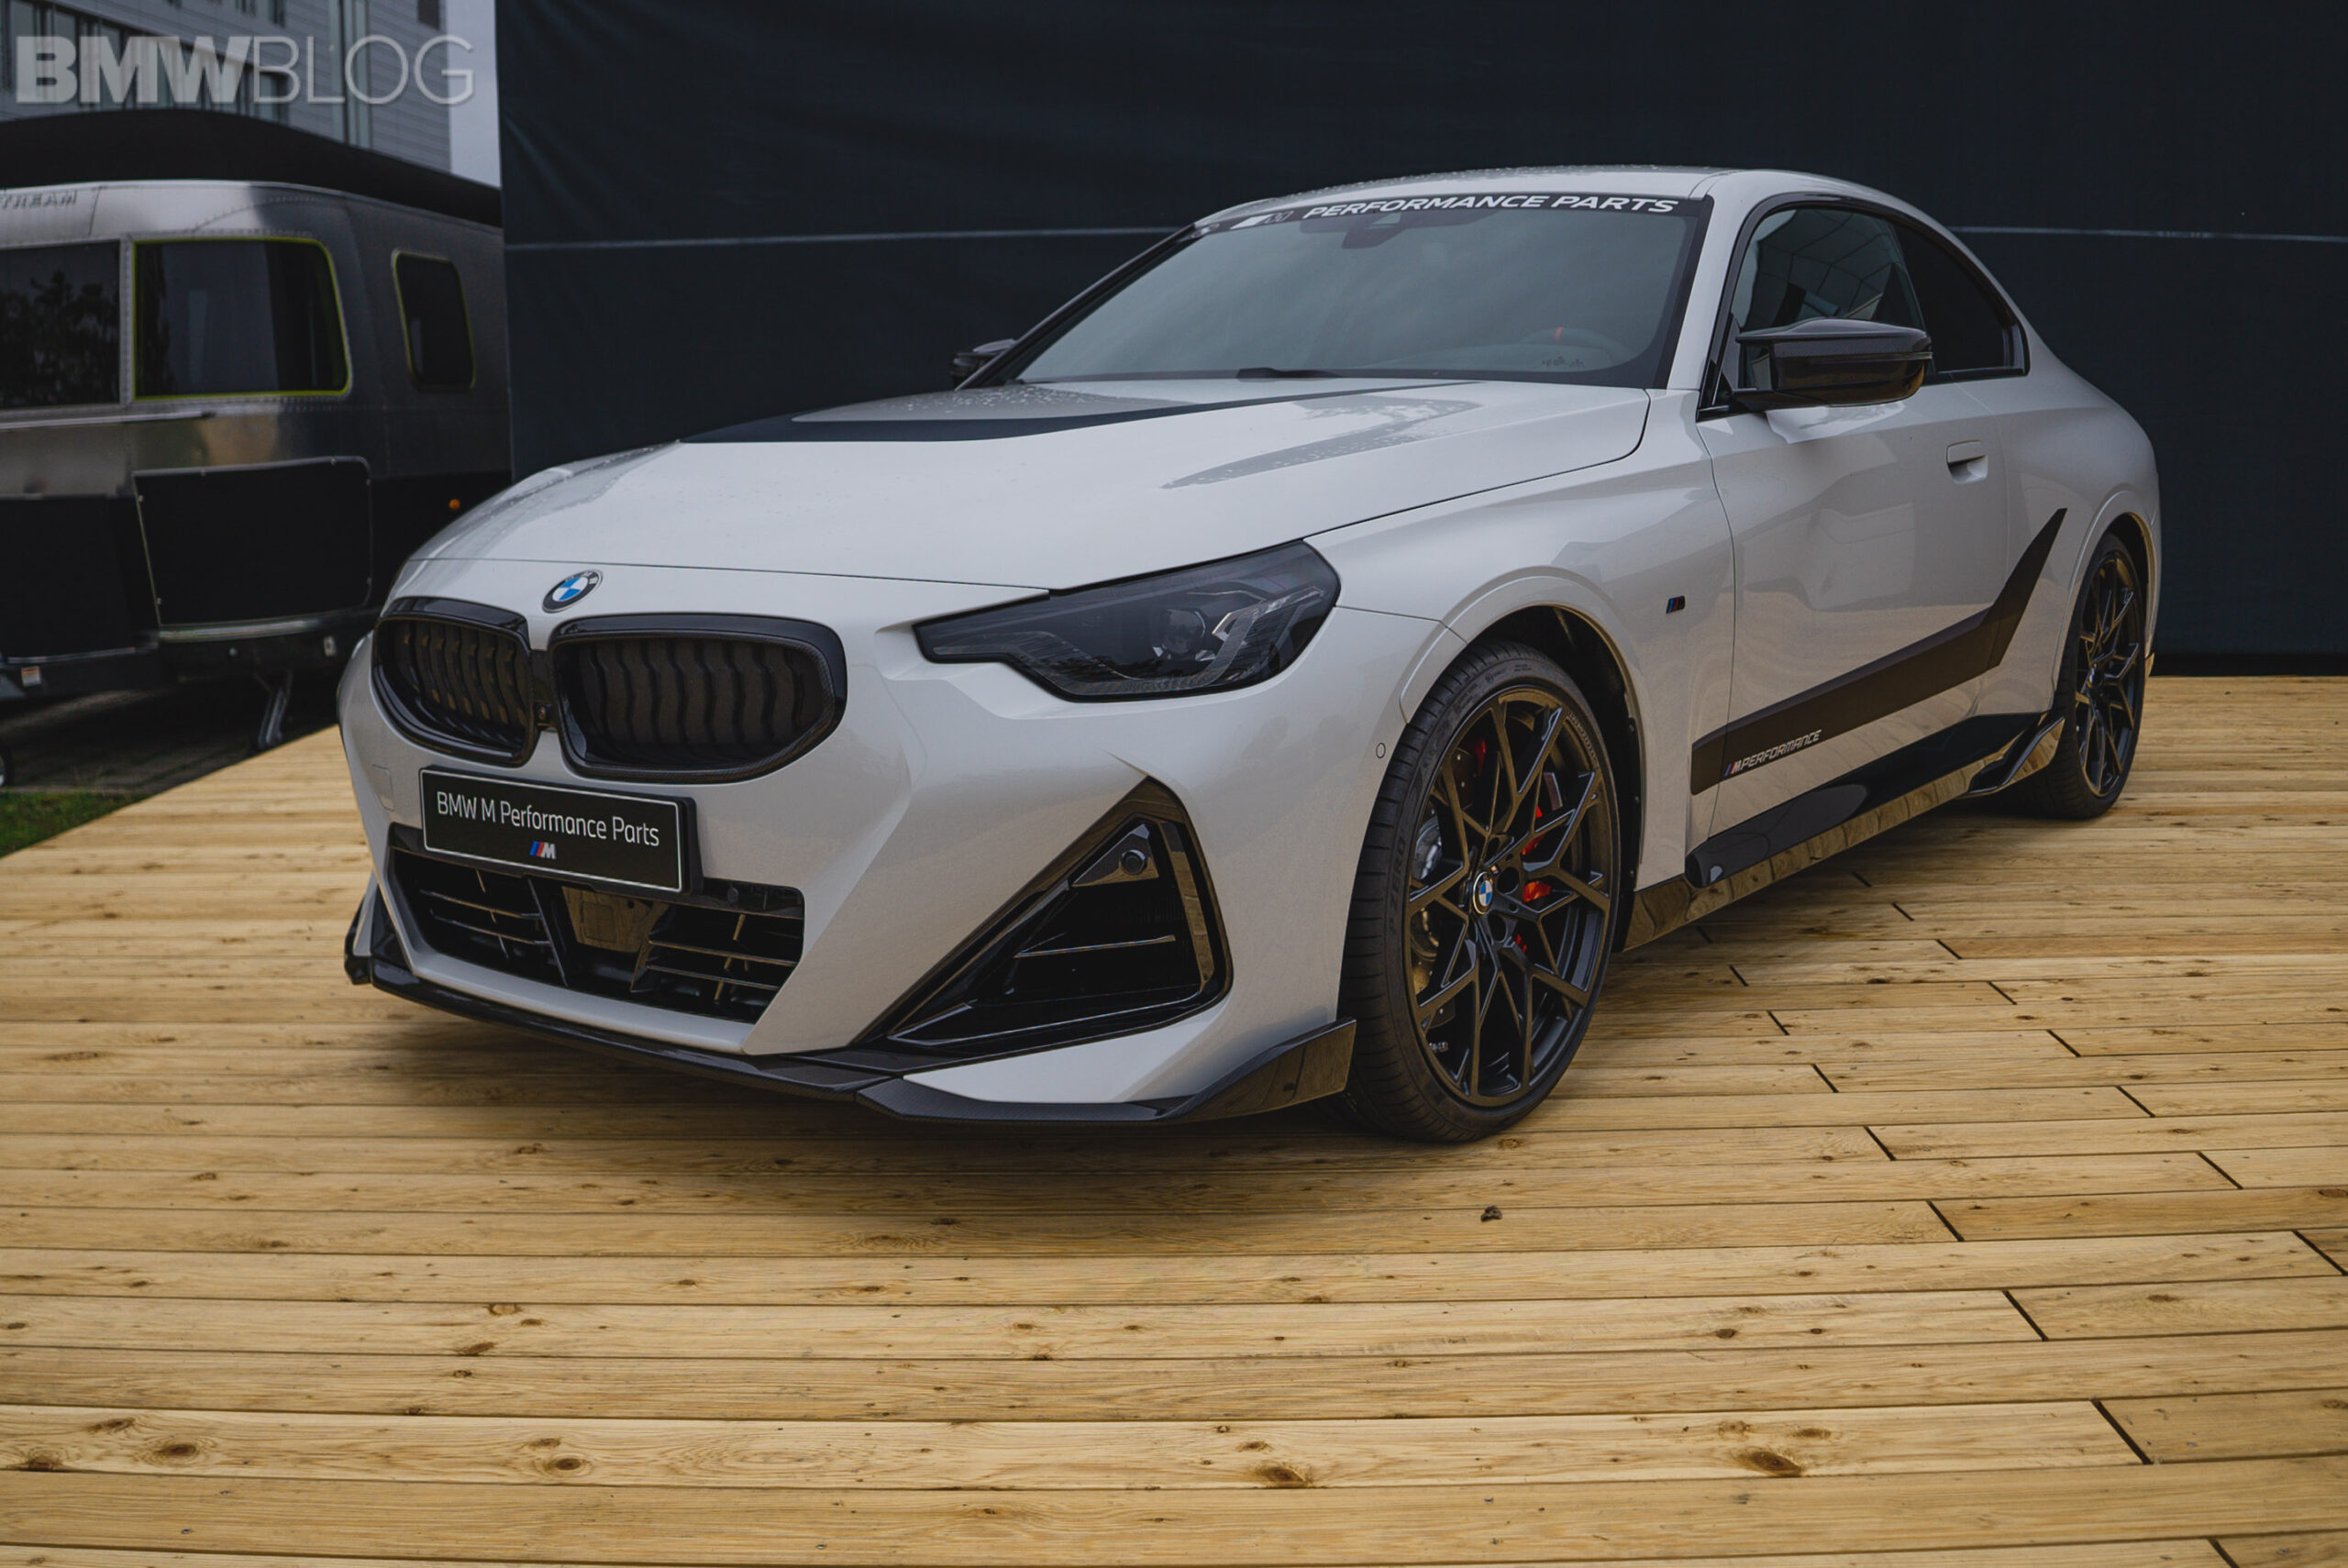 2022 bmw 2 Series m performance parts scaled